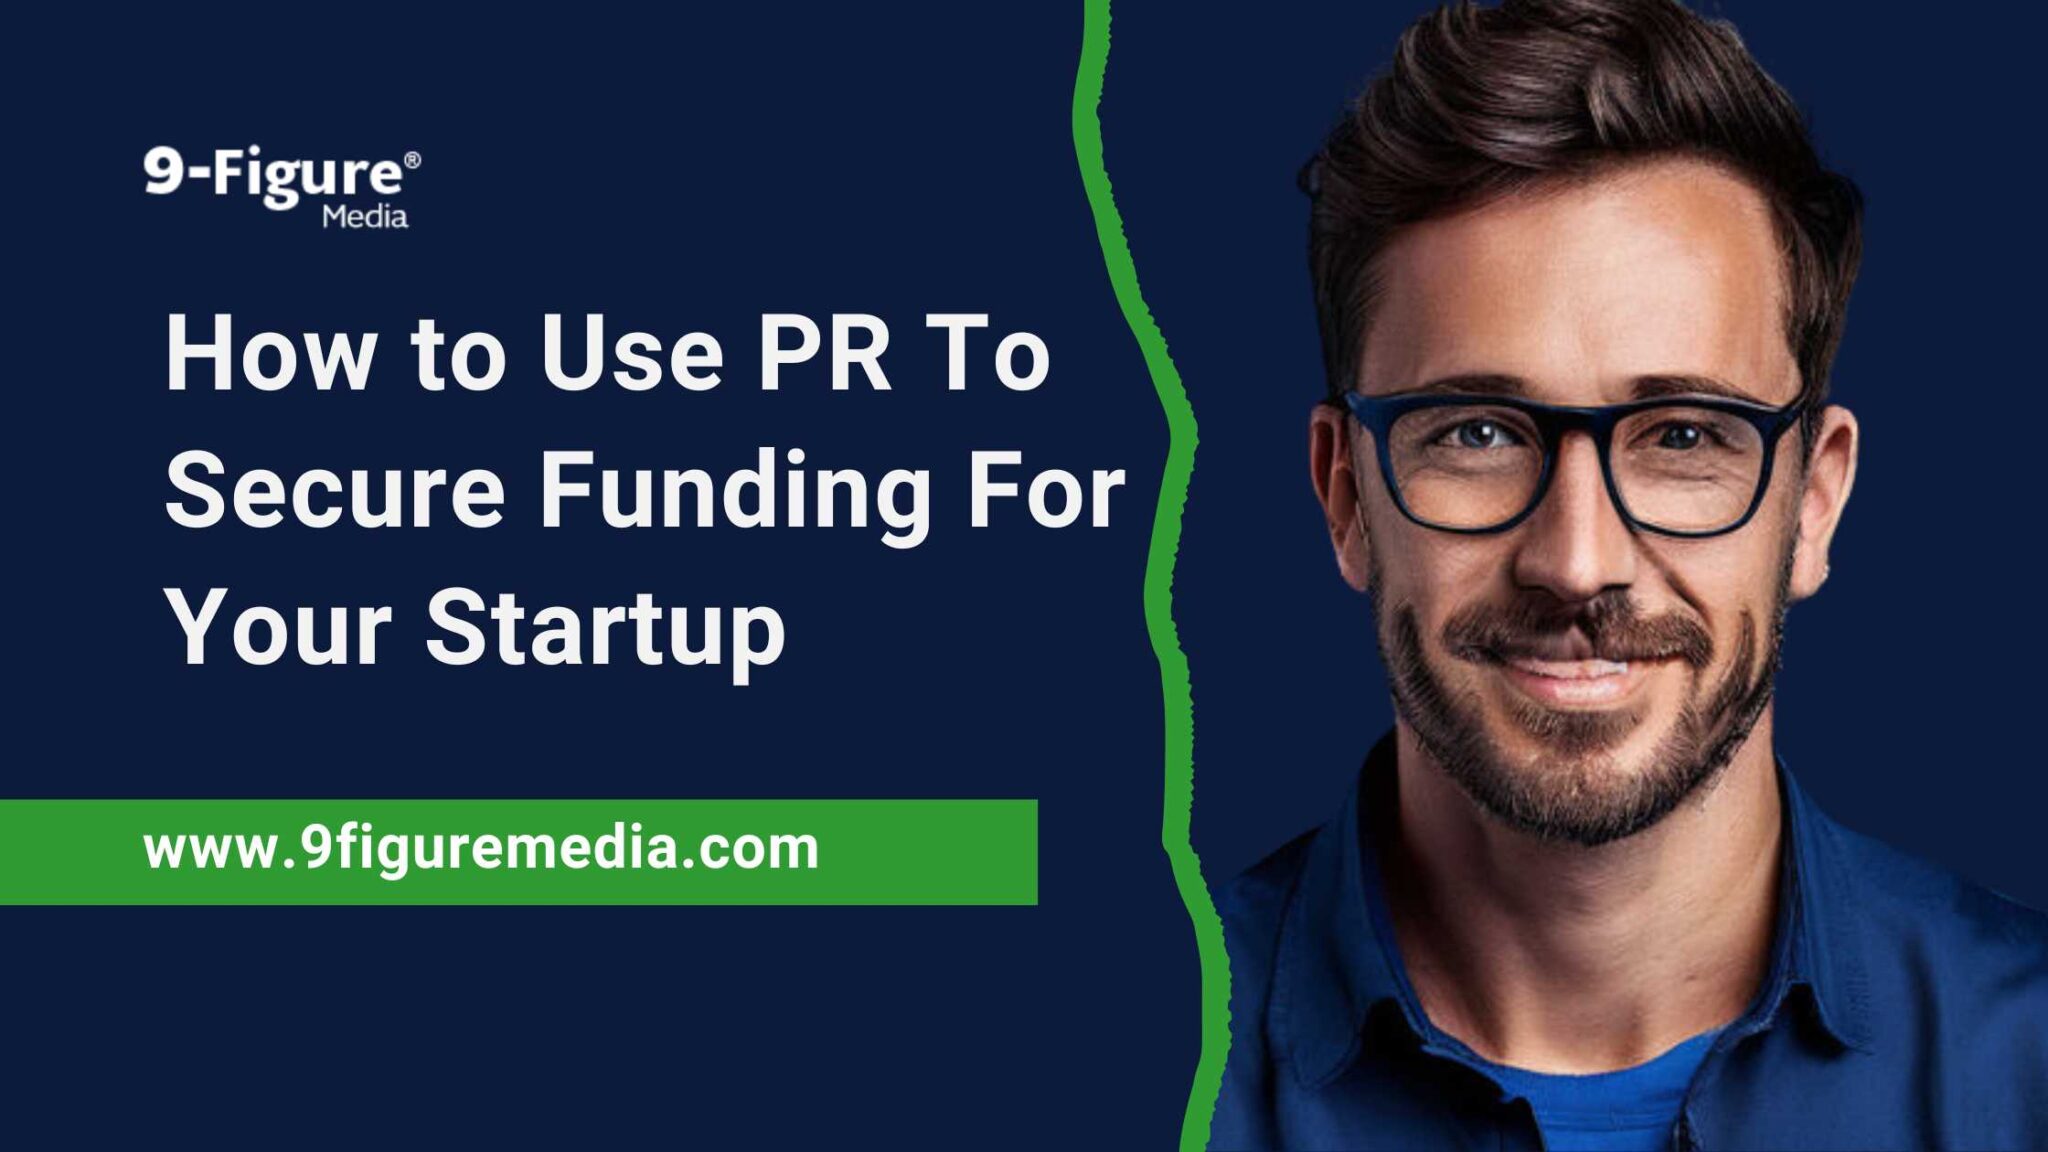 How to Use PR To Secure Funding For Your Startup